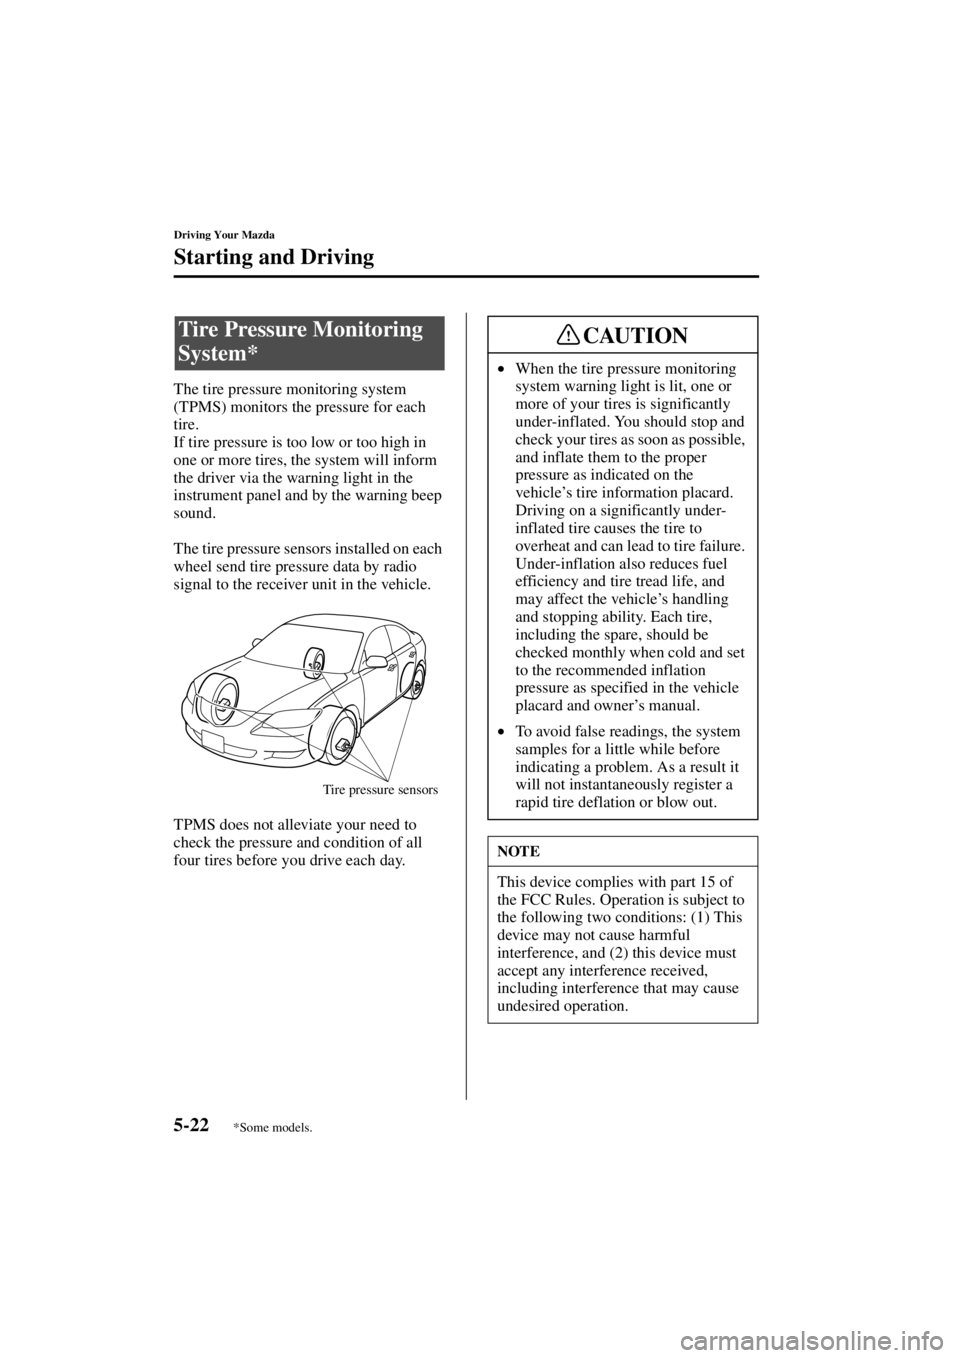 MAZDA MODEL 3 4-DOOR 2004  Owners Manual 5-22
Driving Your Mazda
Starting and Driving
Form No. 8S18-EA-03I
The tire pressure monitoring system 
(TPMS) monitors the pressure for each 
tire.
If tire pressure is too low or too high in 
one or m